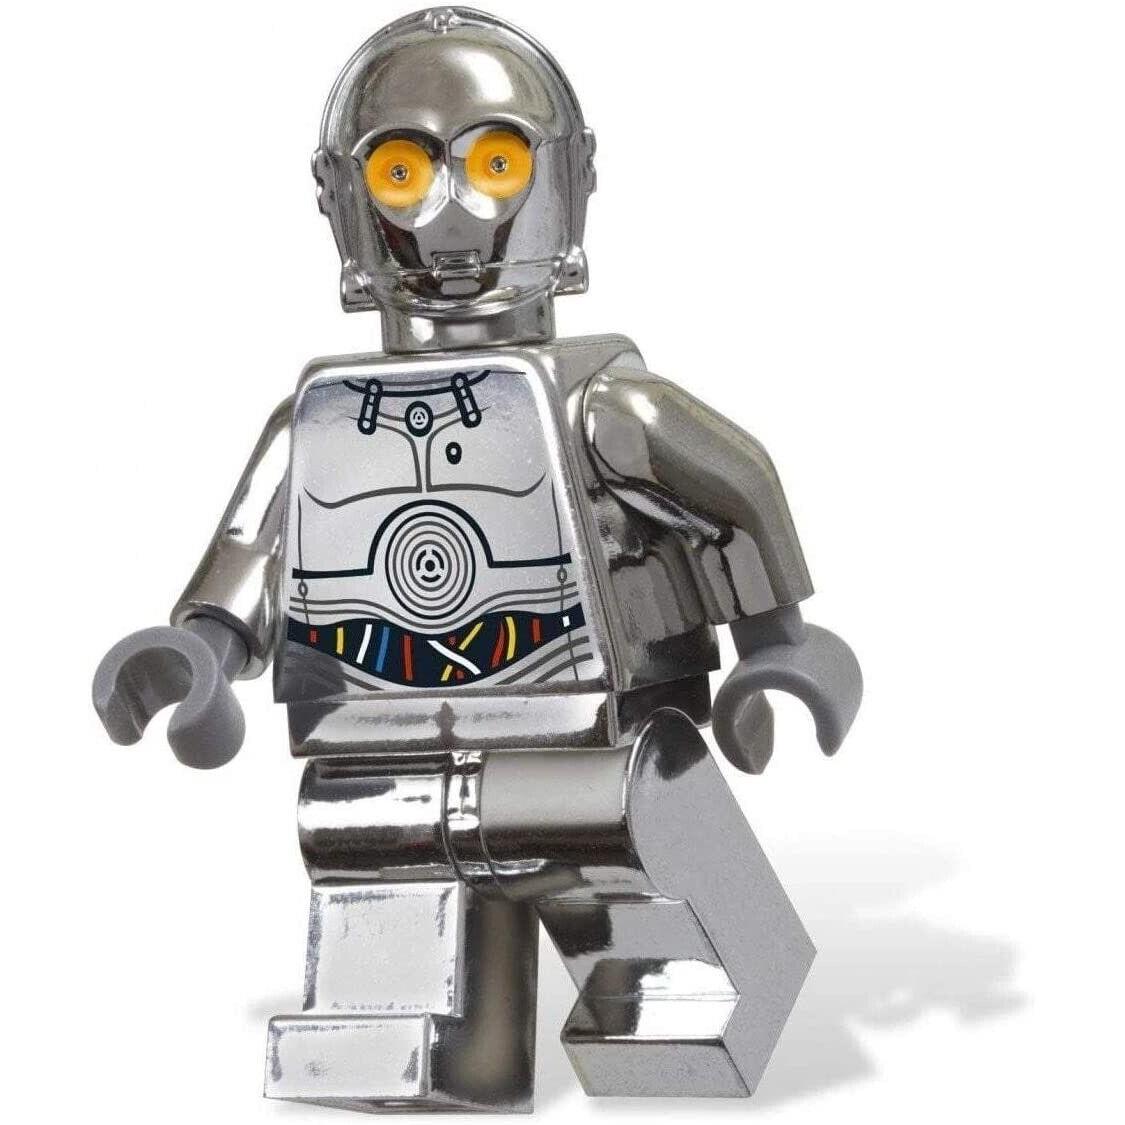 Lego Star Wars 5000063 TC-14 Minifigure Silver Chrome Exclusive Limited - Silver